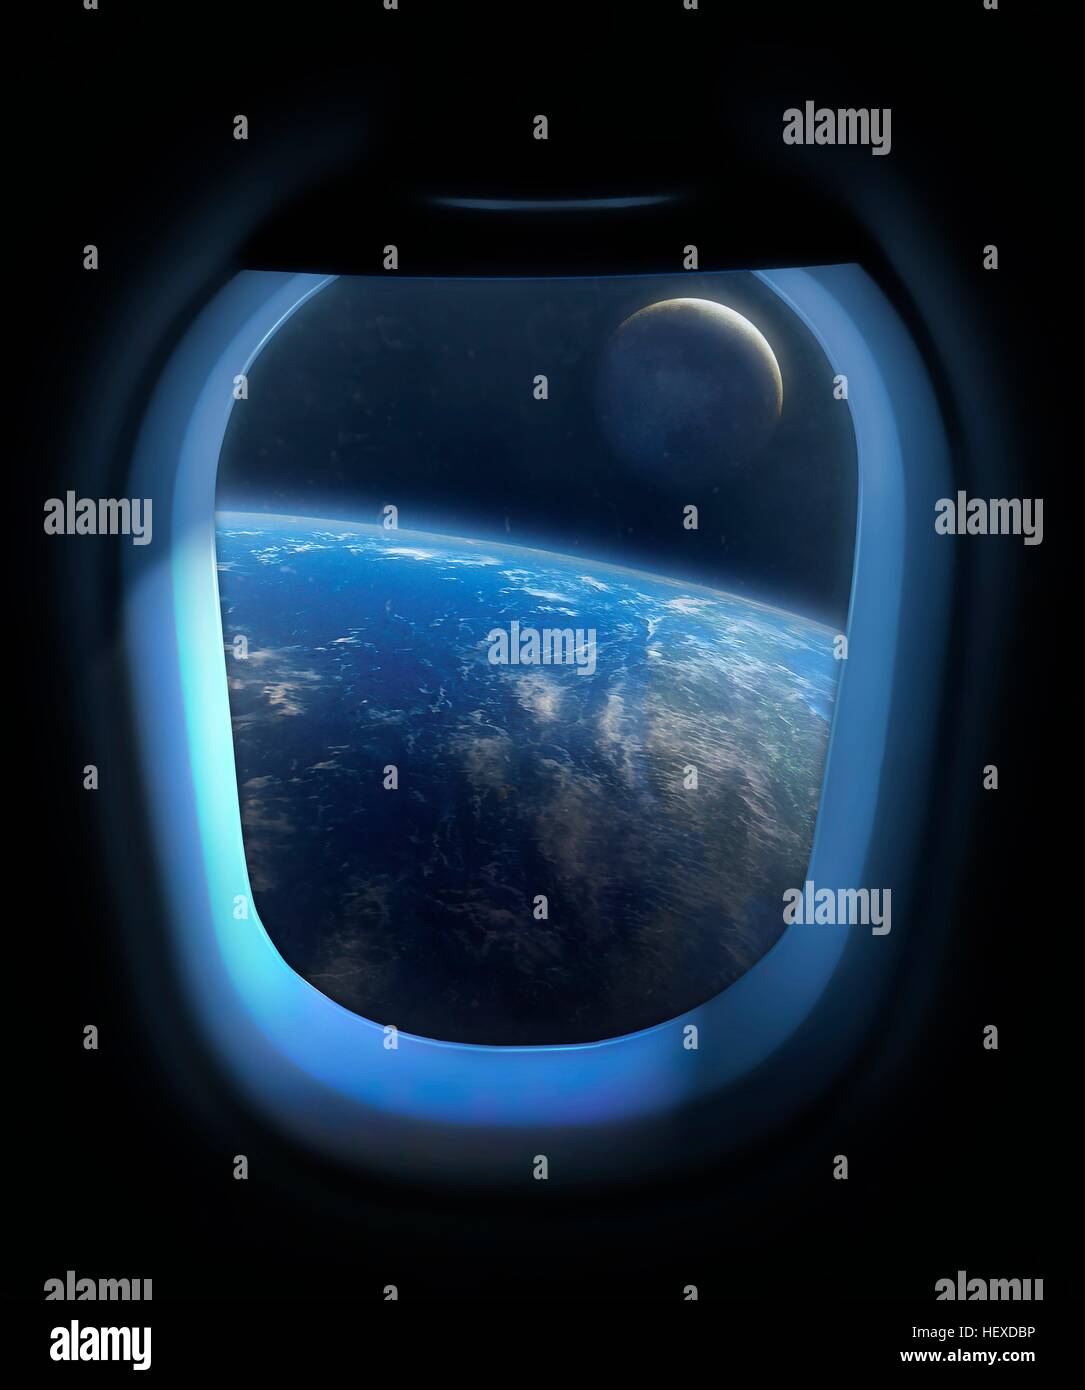 Artwork showing the Earth and Moon from the window of a space vehicle, sometime in the future. The view shows the lunar far side directly beneath us, with the Earth in the distance. Maybe, in the future, tourists will be able to enjoy views like this in space. Stock Photo